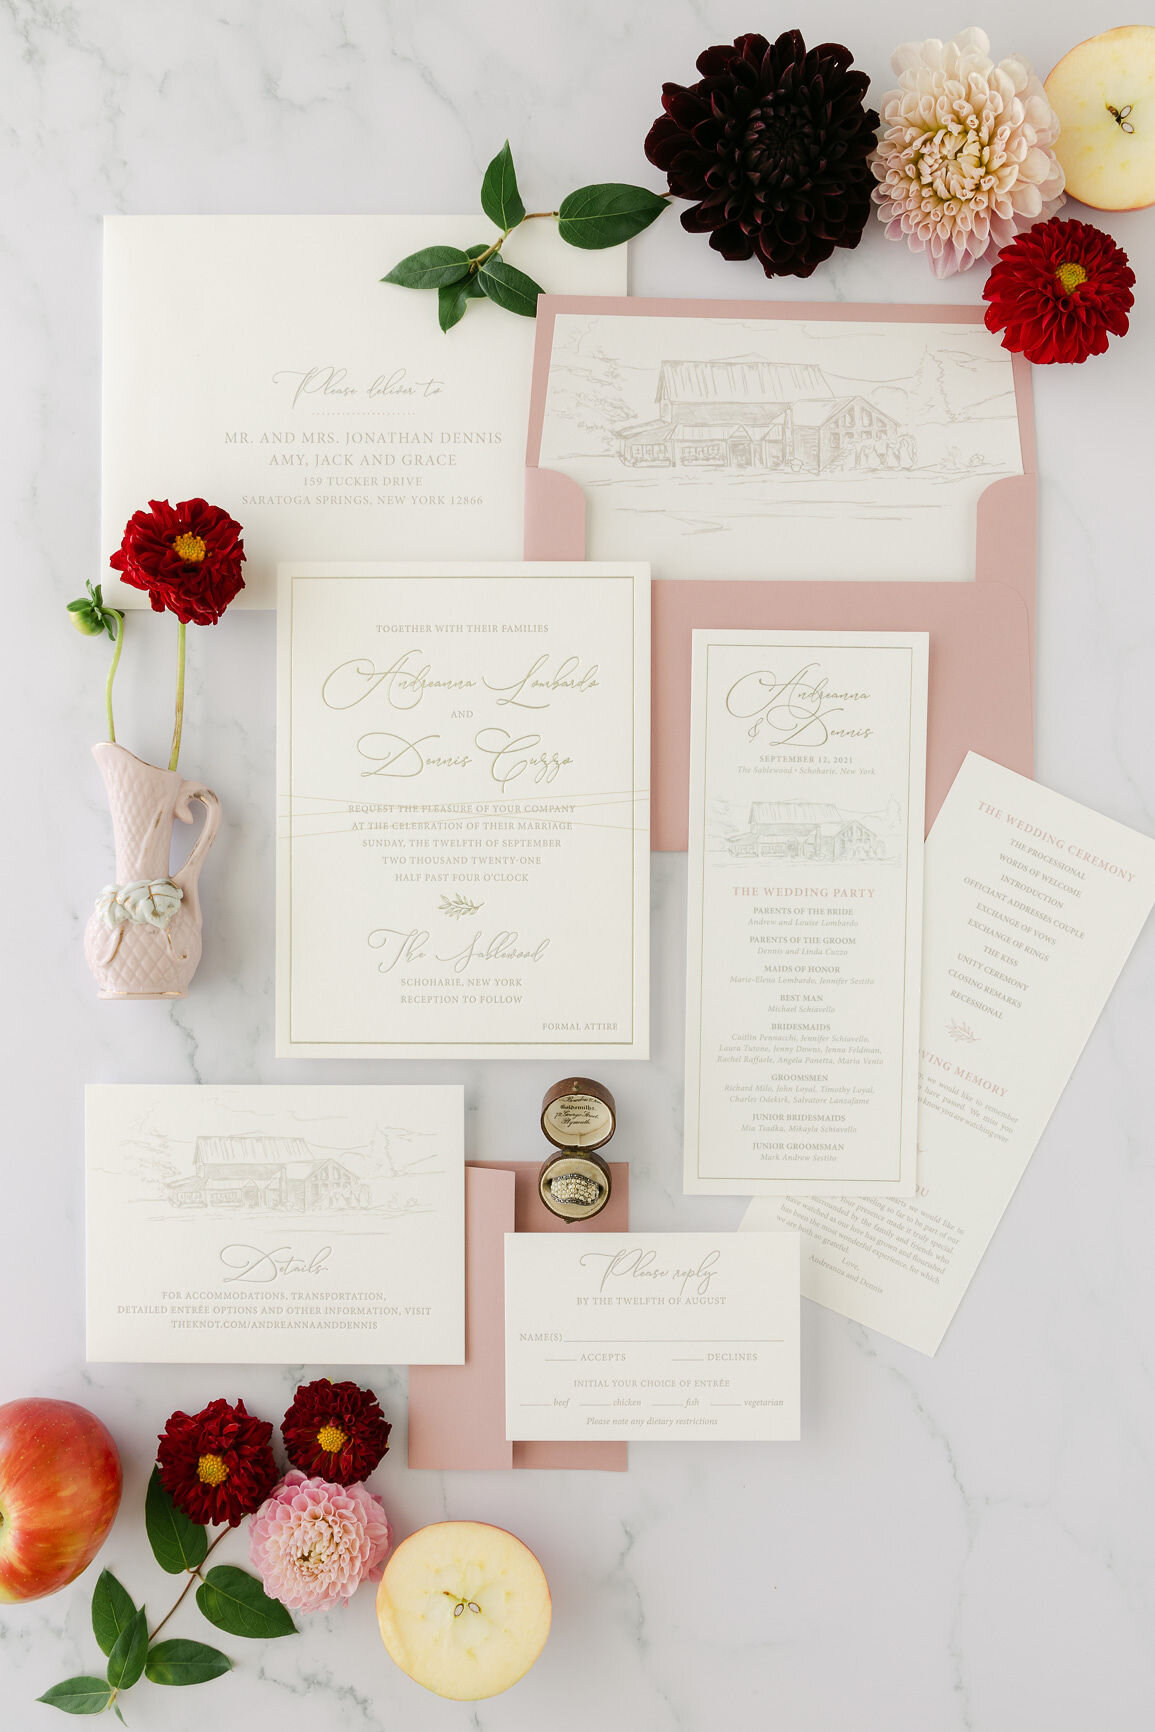 Custom dusty rose wedding invitation and ceremony programs with venue illustration for The Sablewood in Upstate New York